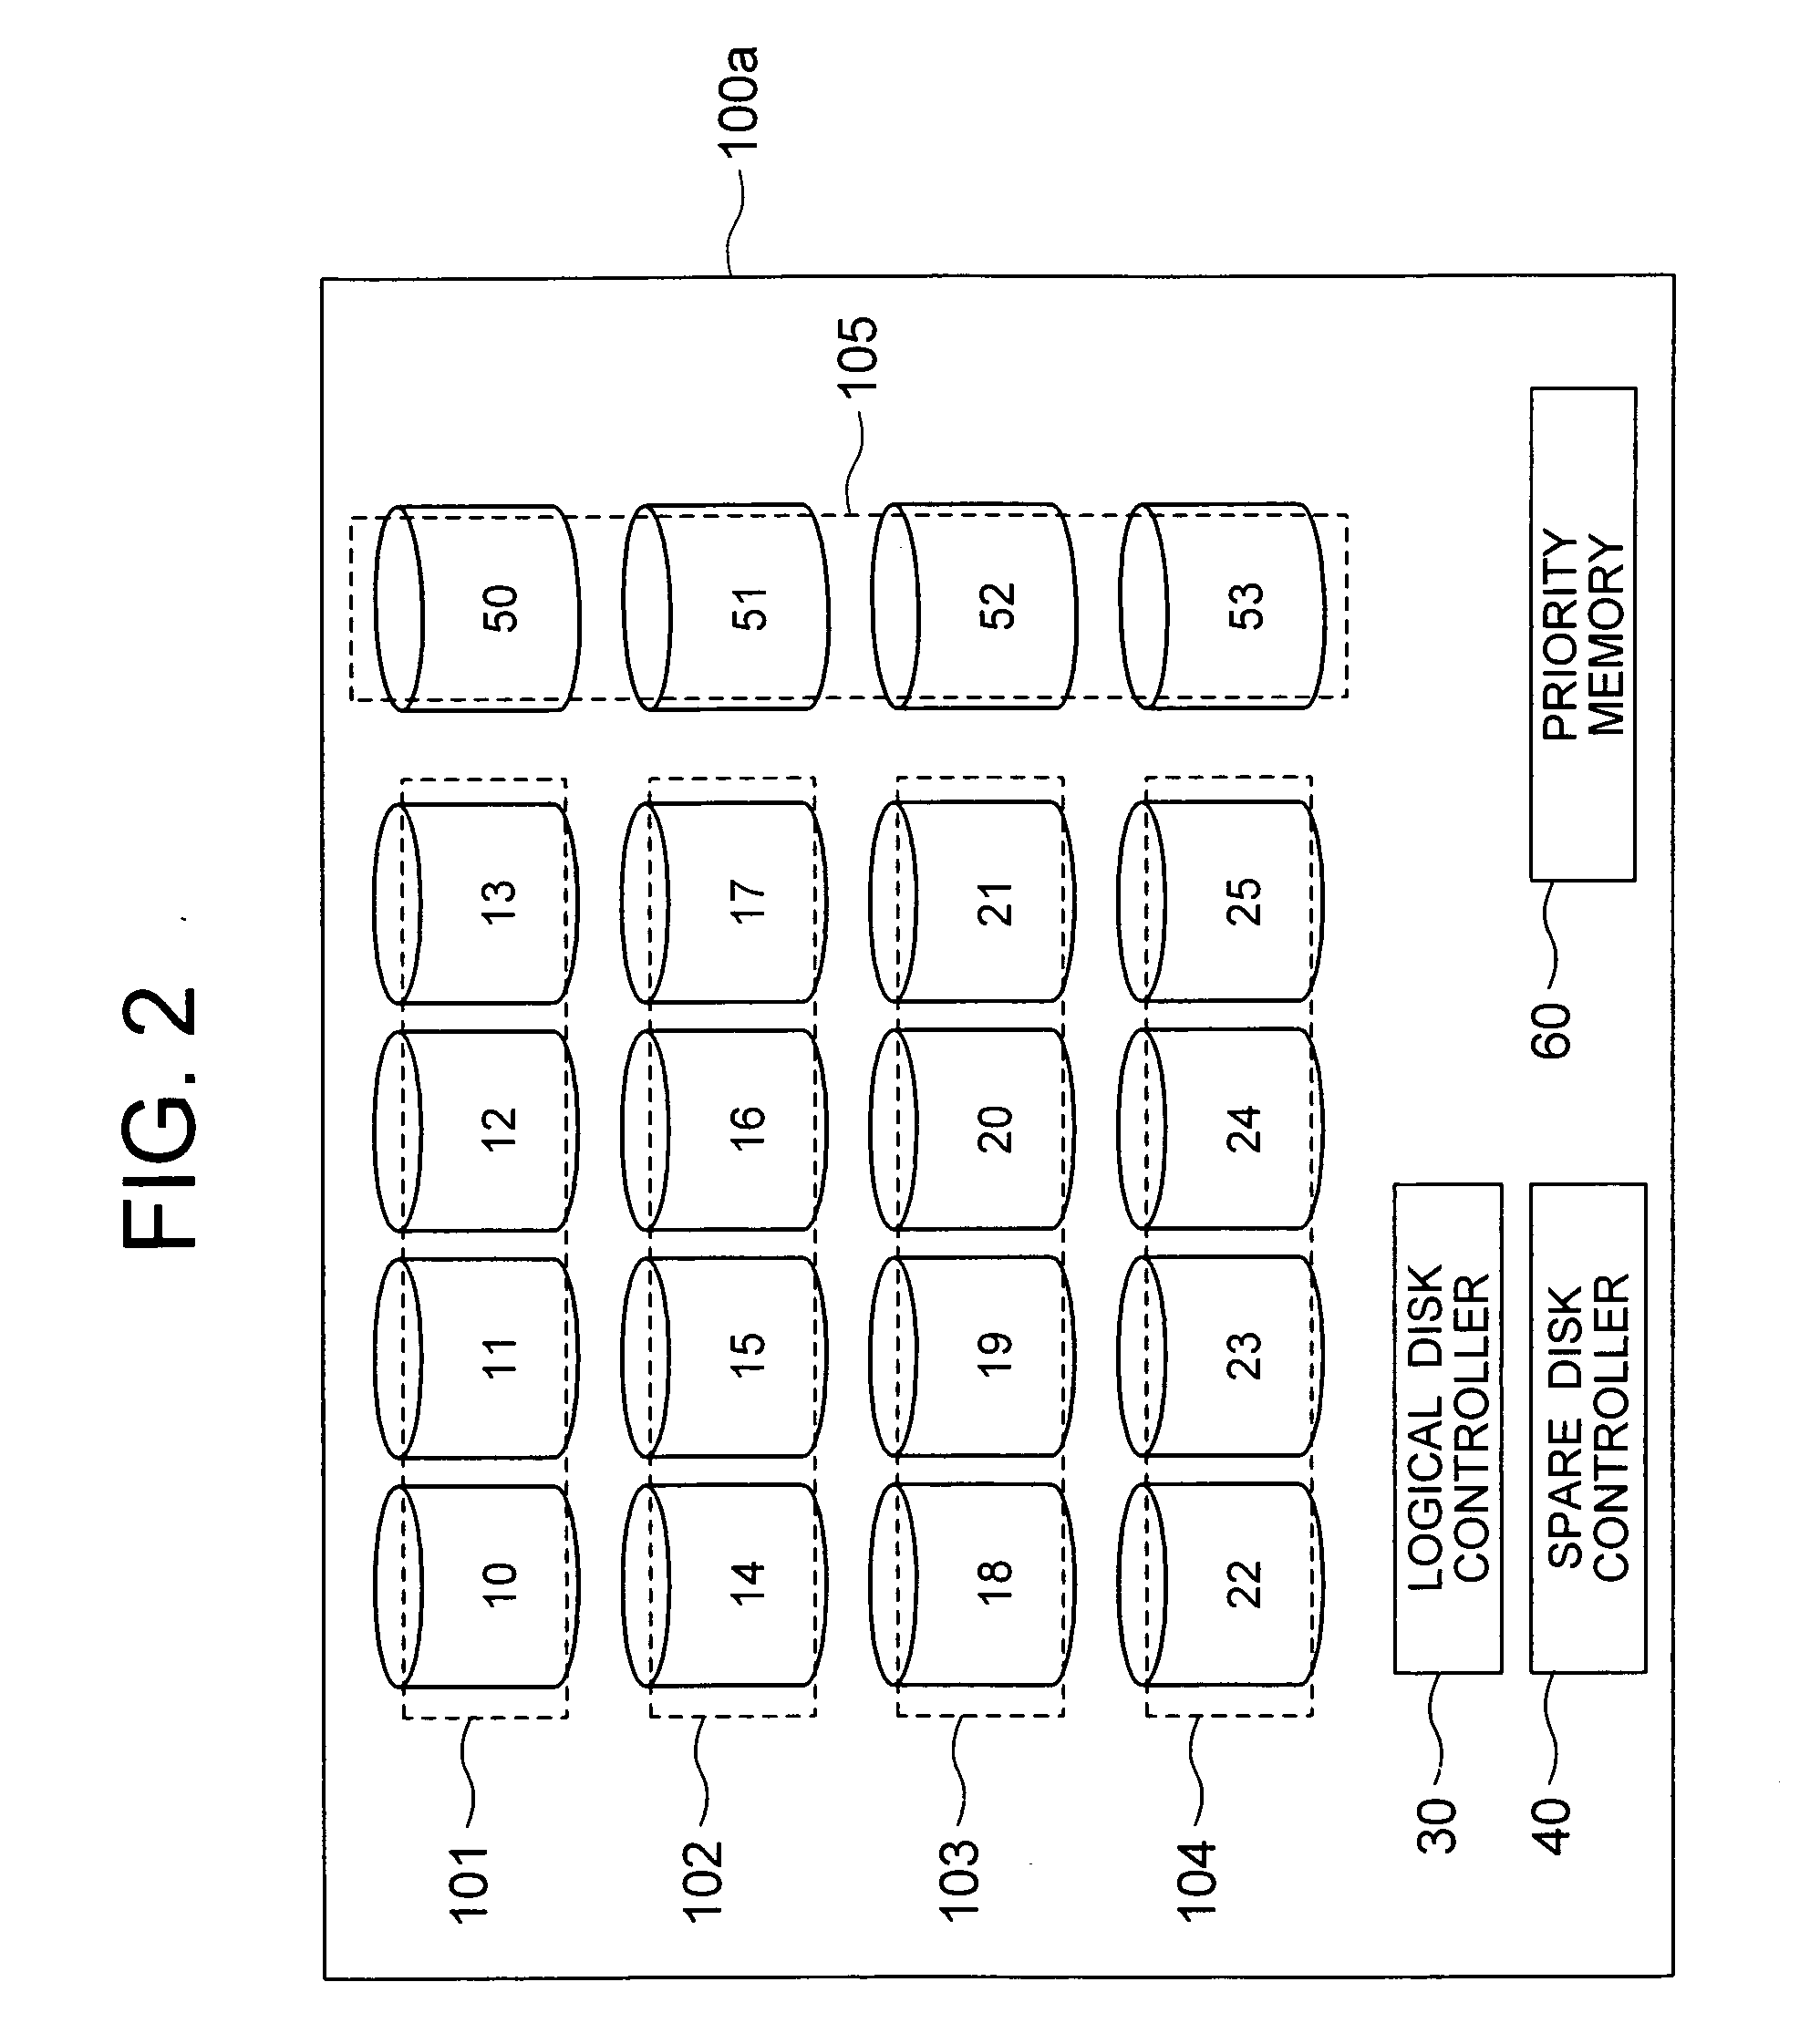 Disk array system configuring a logical disk drive having a redundancy function